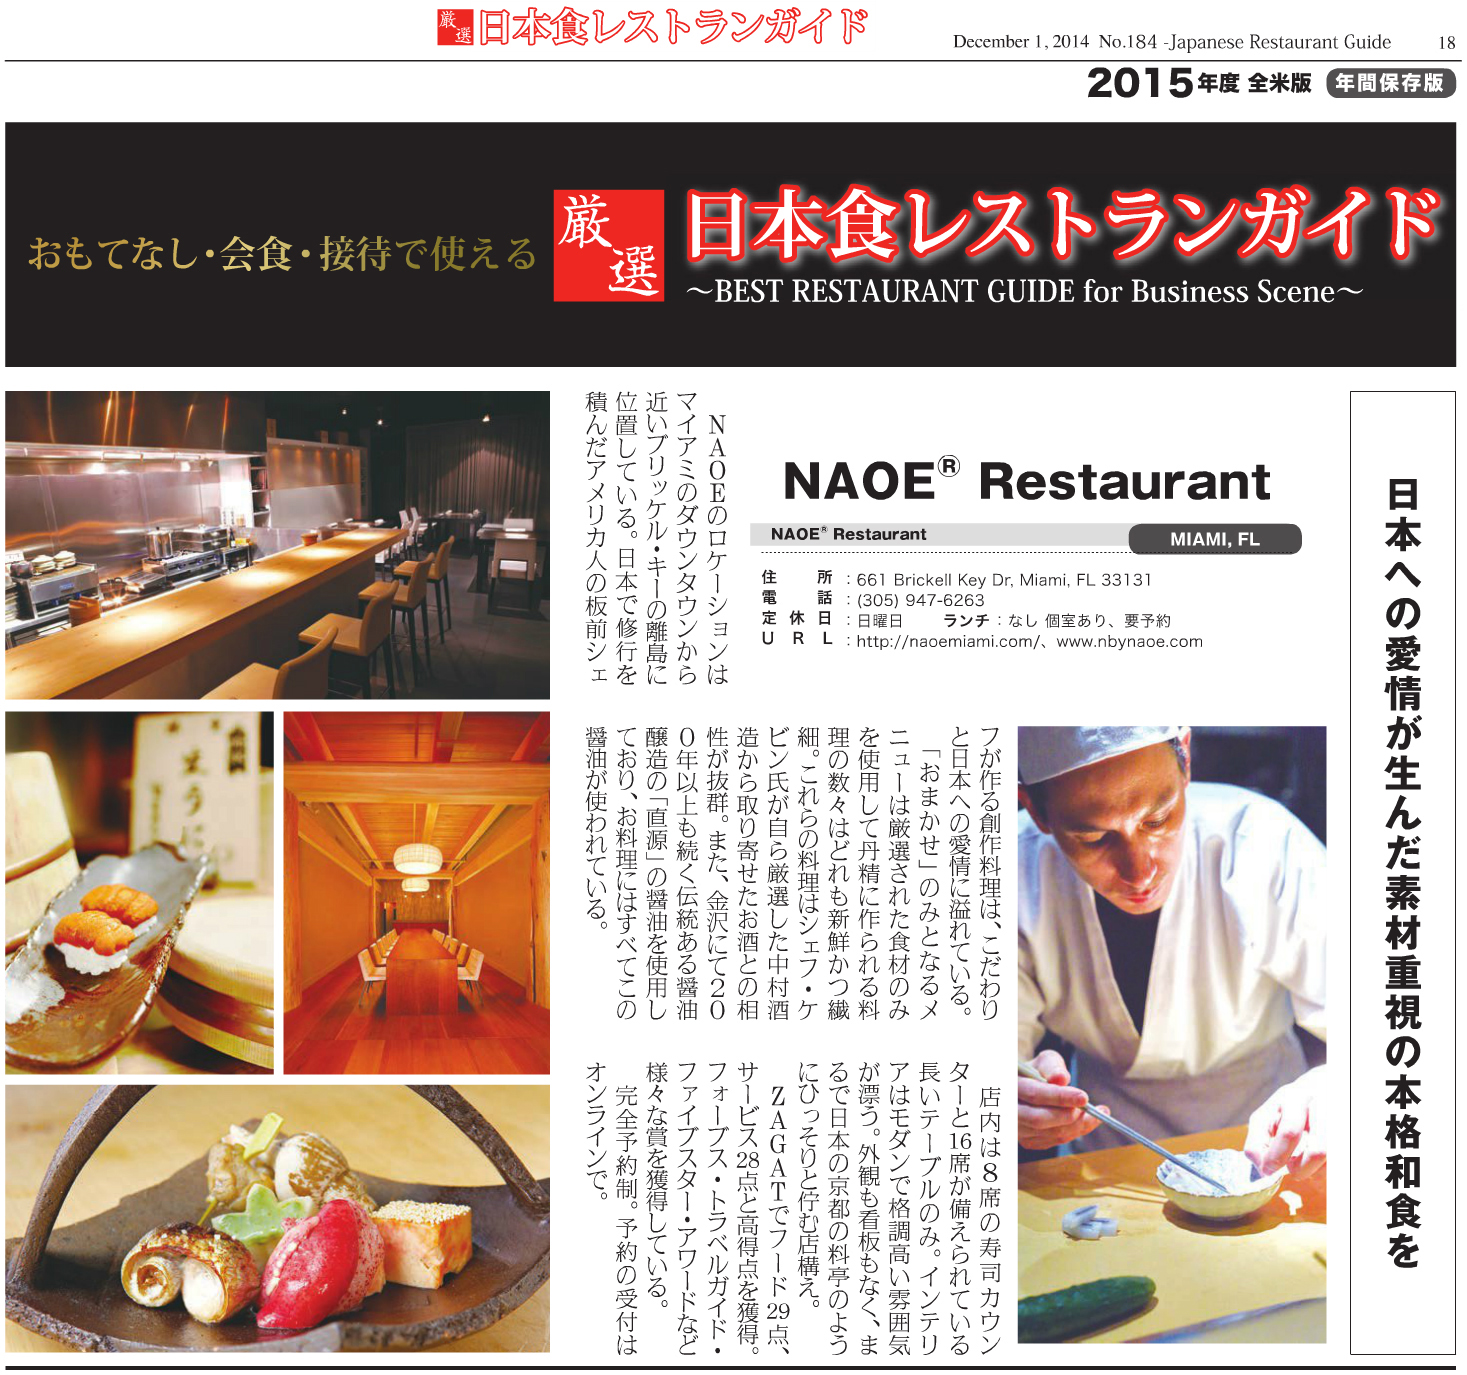 ujp us japan publication, japanese restaurant guide, special select 50, kevin cory, naoe, n by naoe